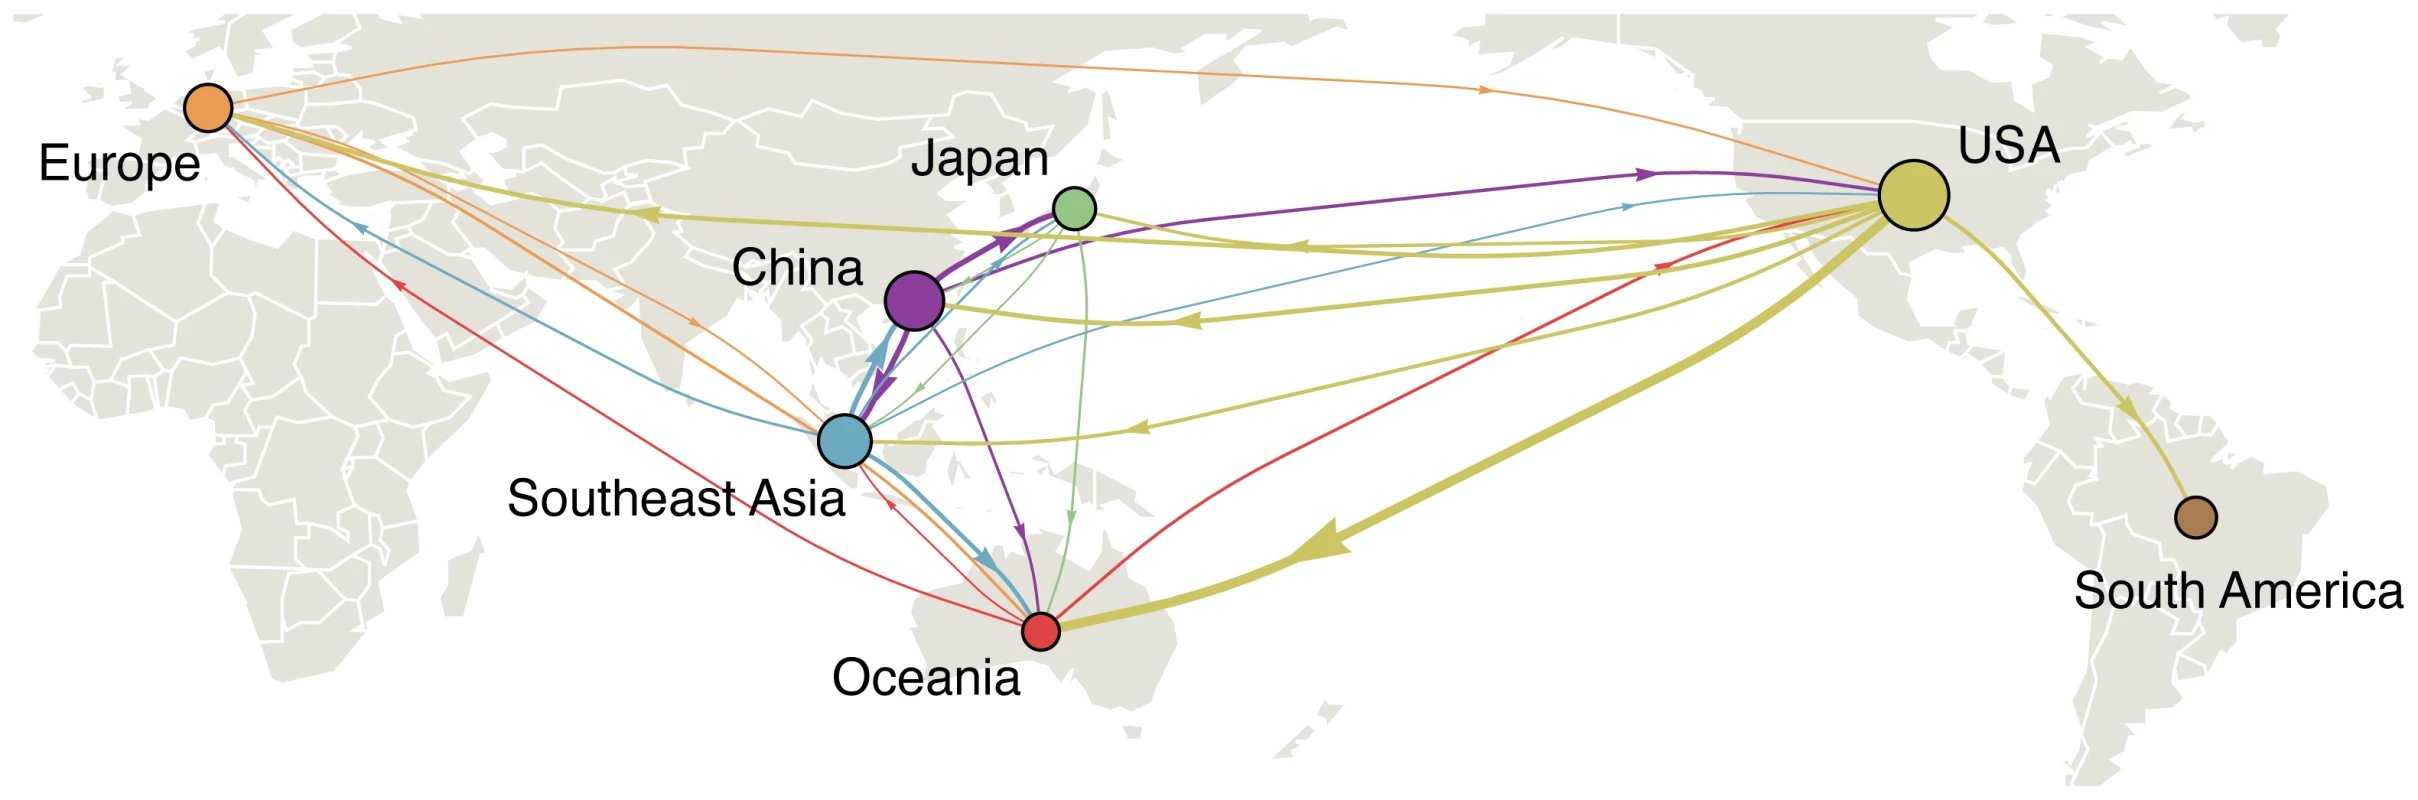 Global migration patterns of influenza A (H3N2) estimated from sequence data between 2002–2008.